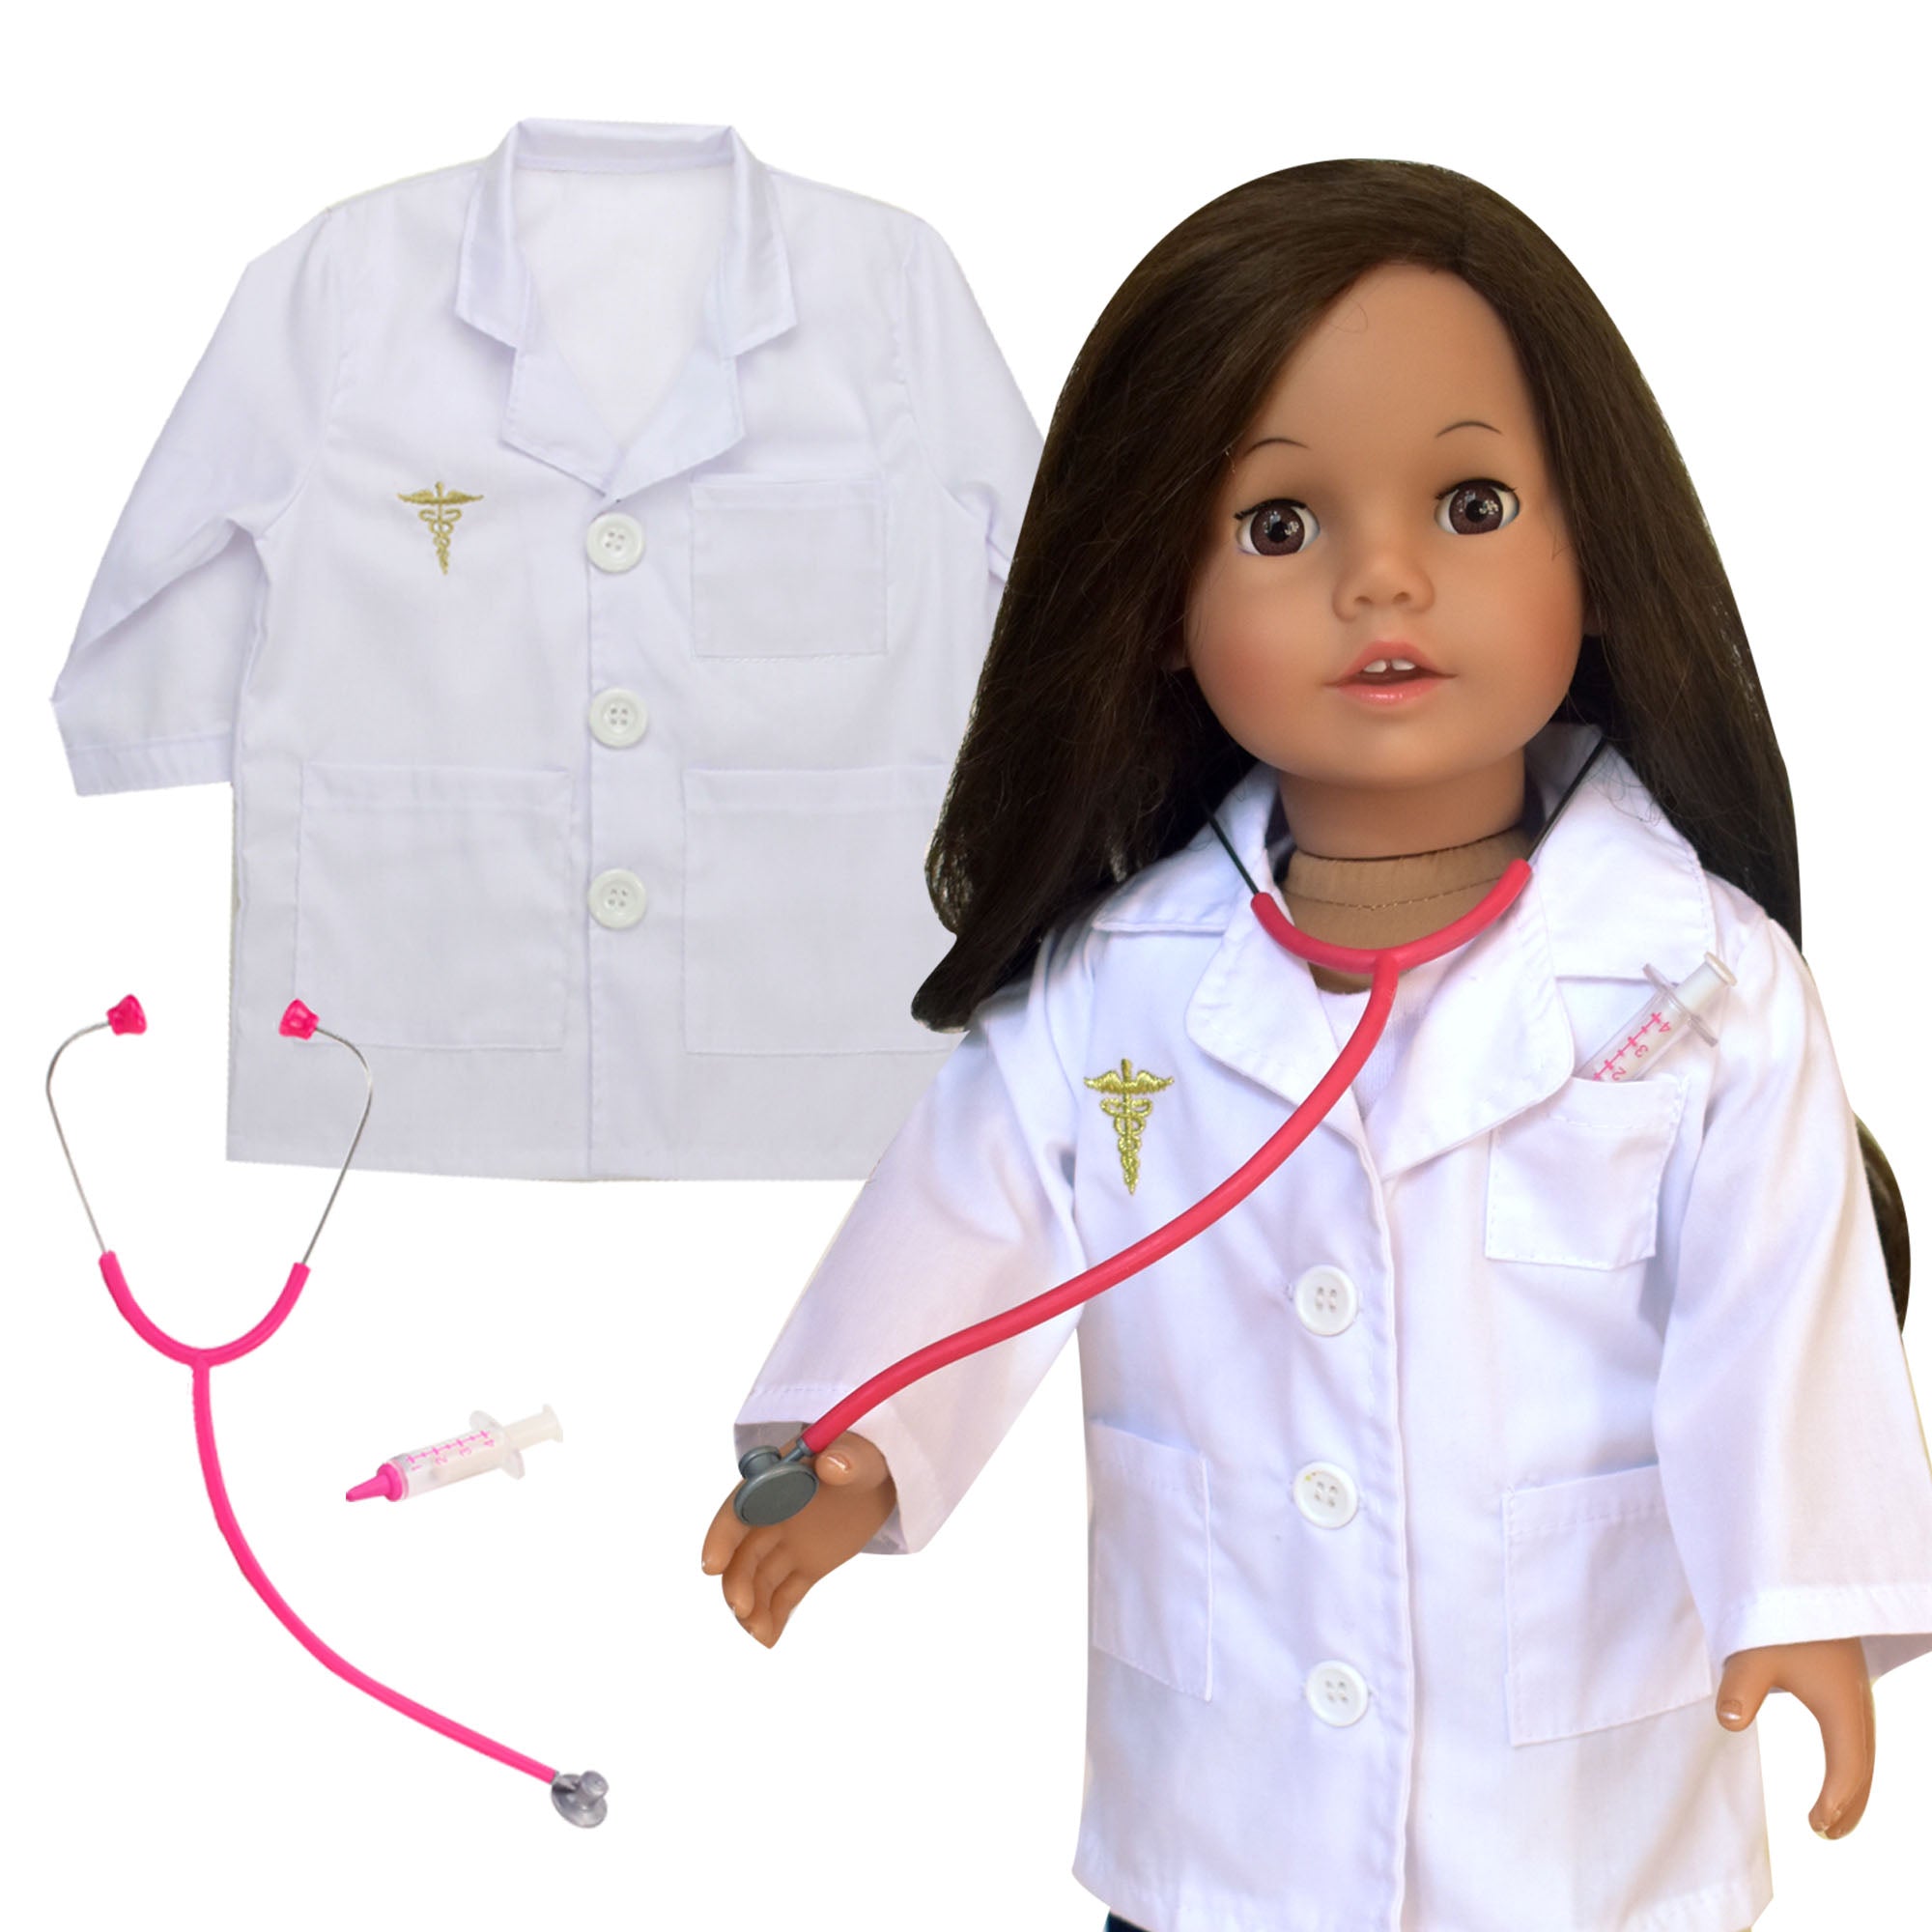 Sophia's Doctor Coat and Accessory Set for Children and 18" Doll